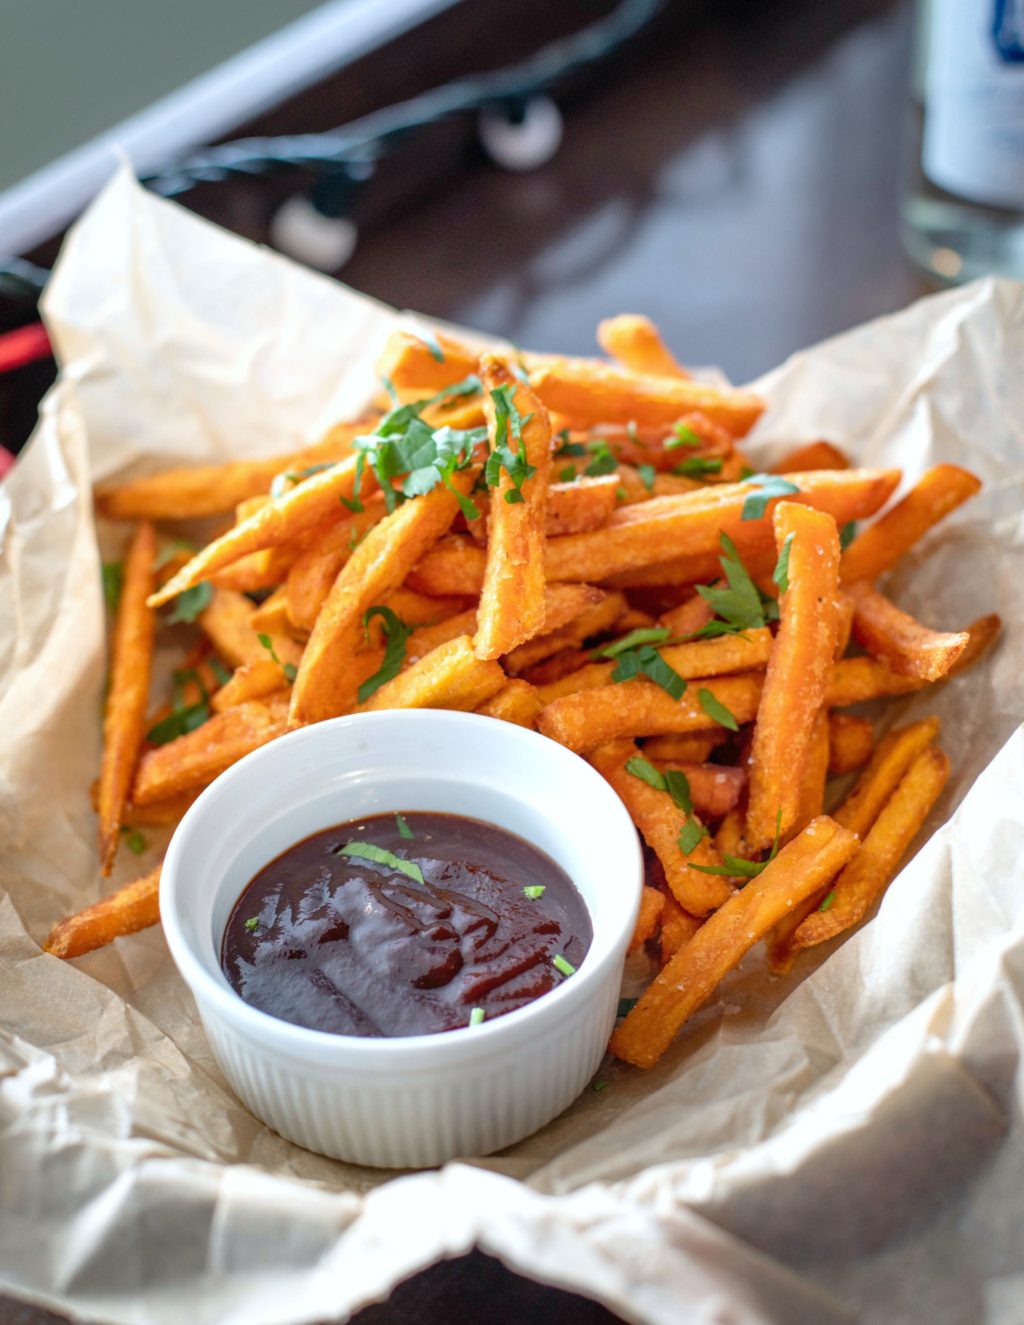 A plate full of sweet potato fries topped with herbs and bbq sauce to dip. 